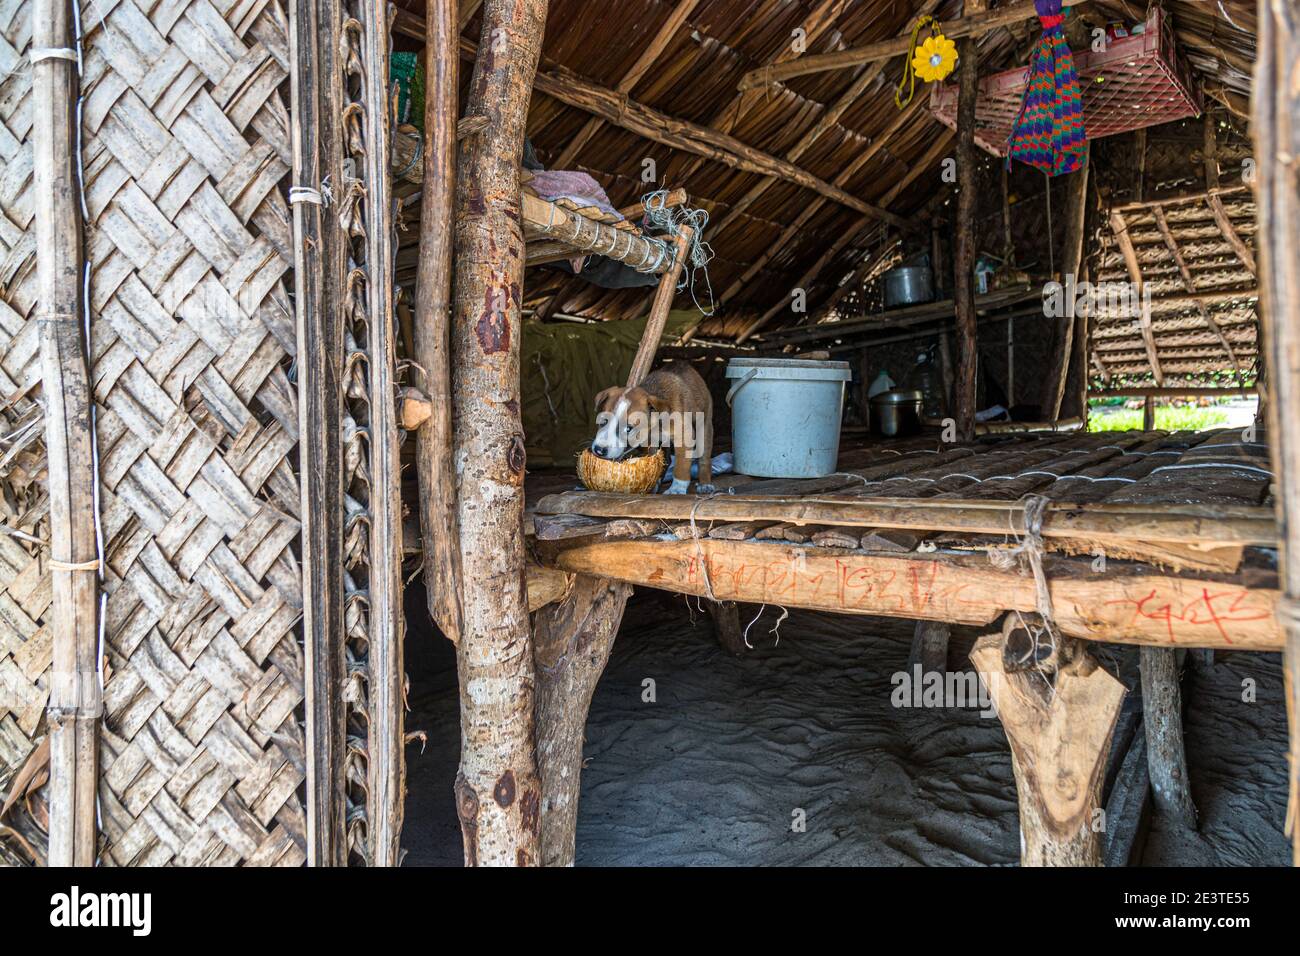 Little Dog in typical Hut of Papua New Guinea Stock Photo